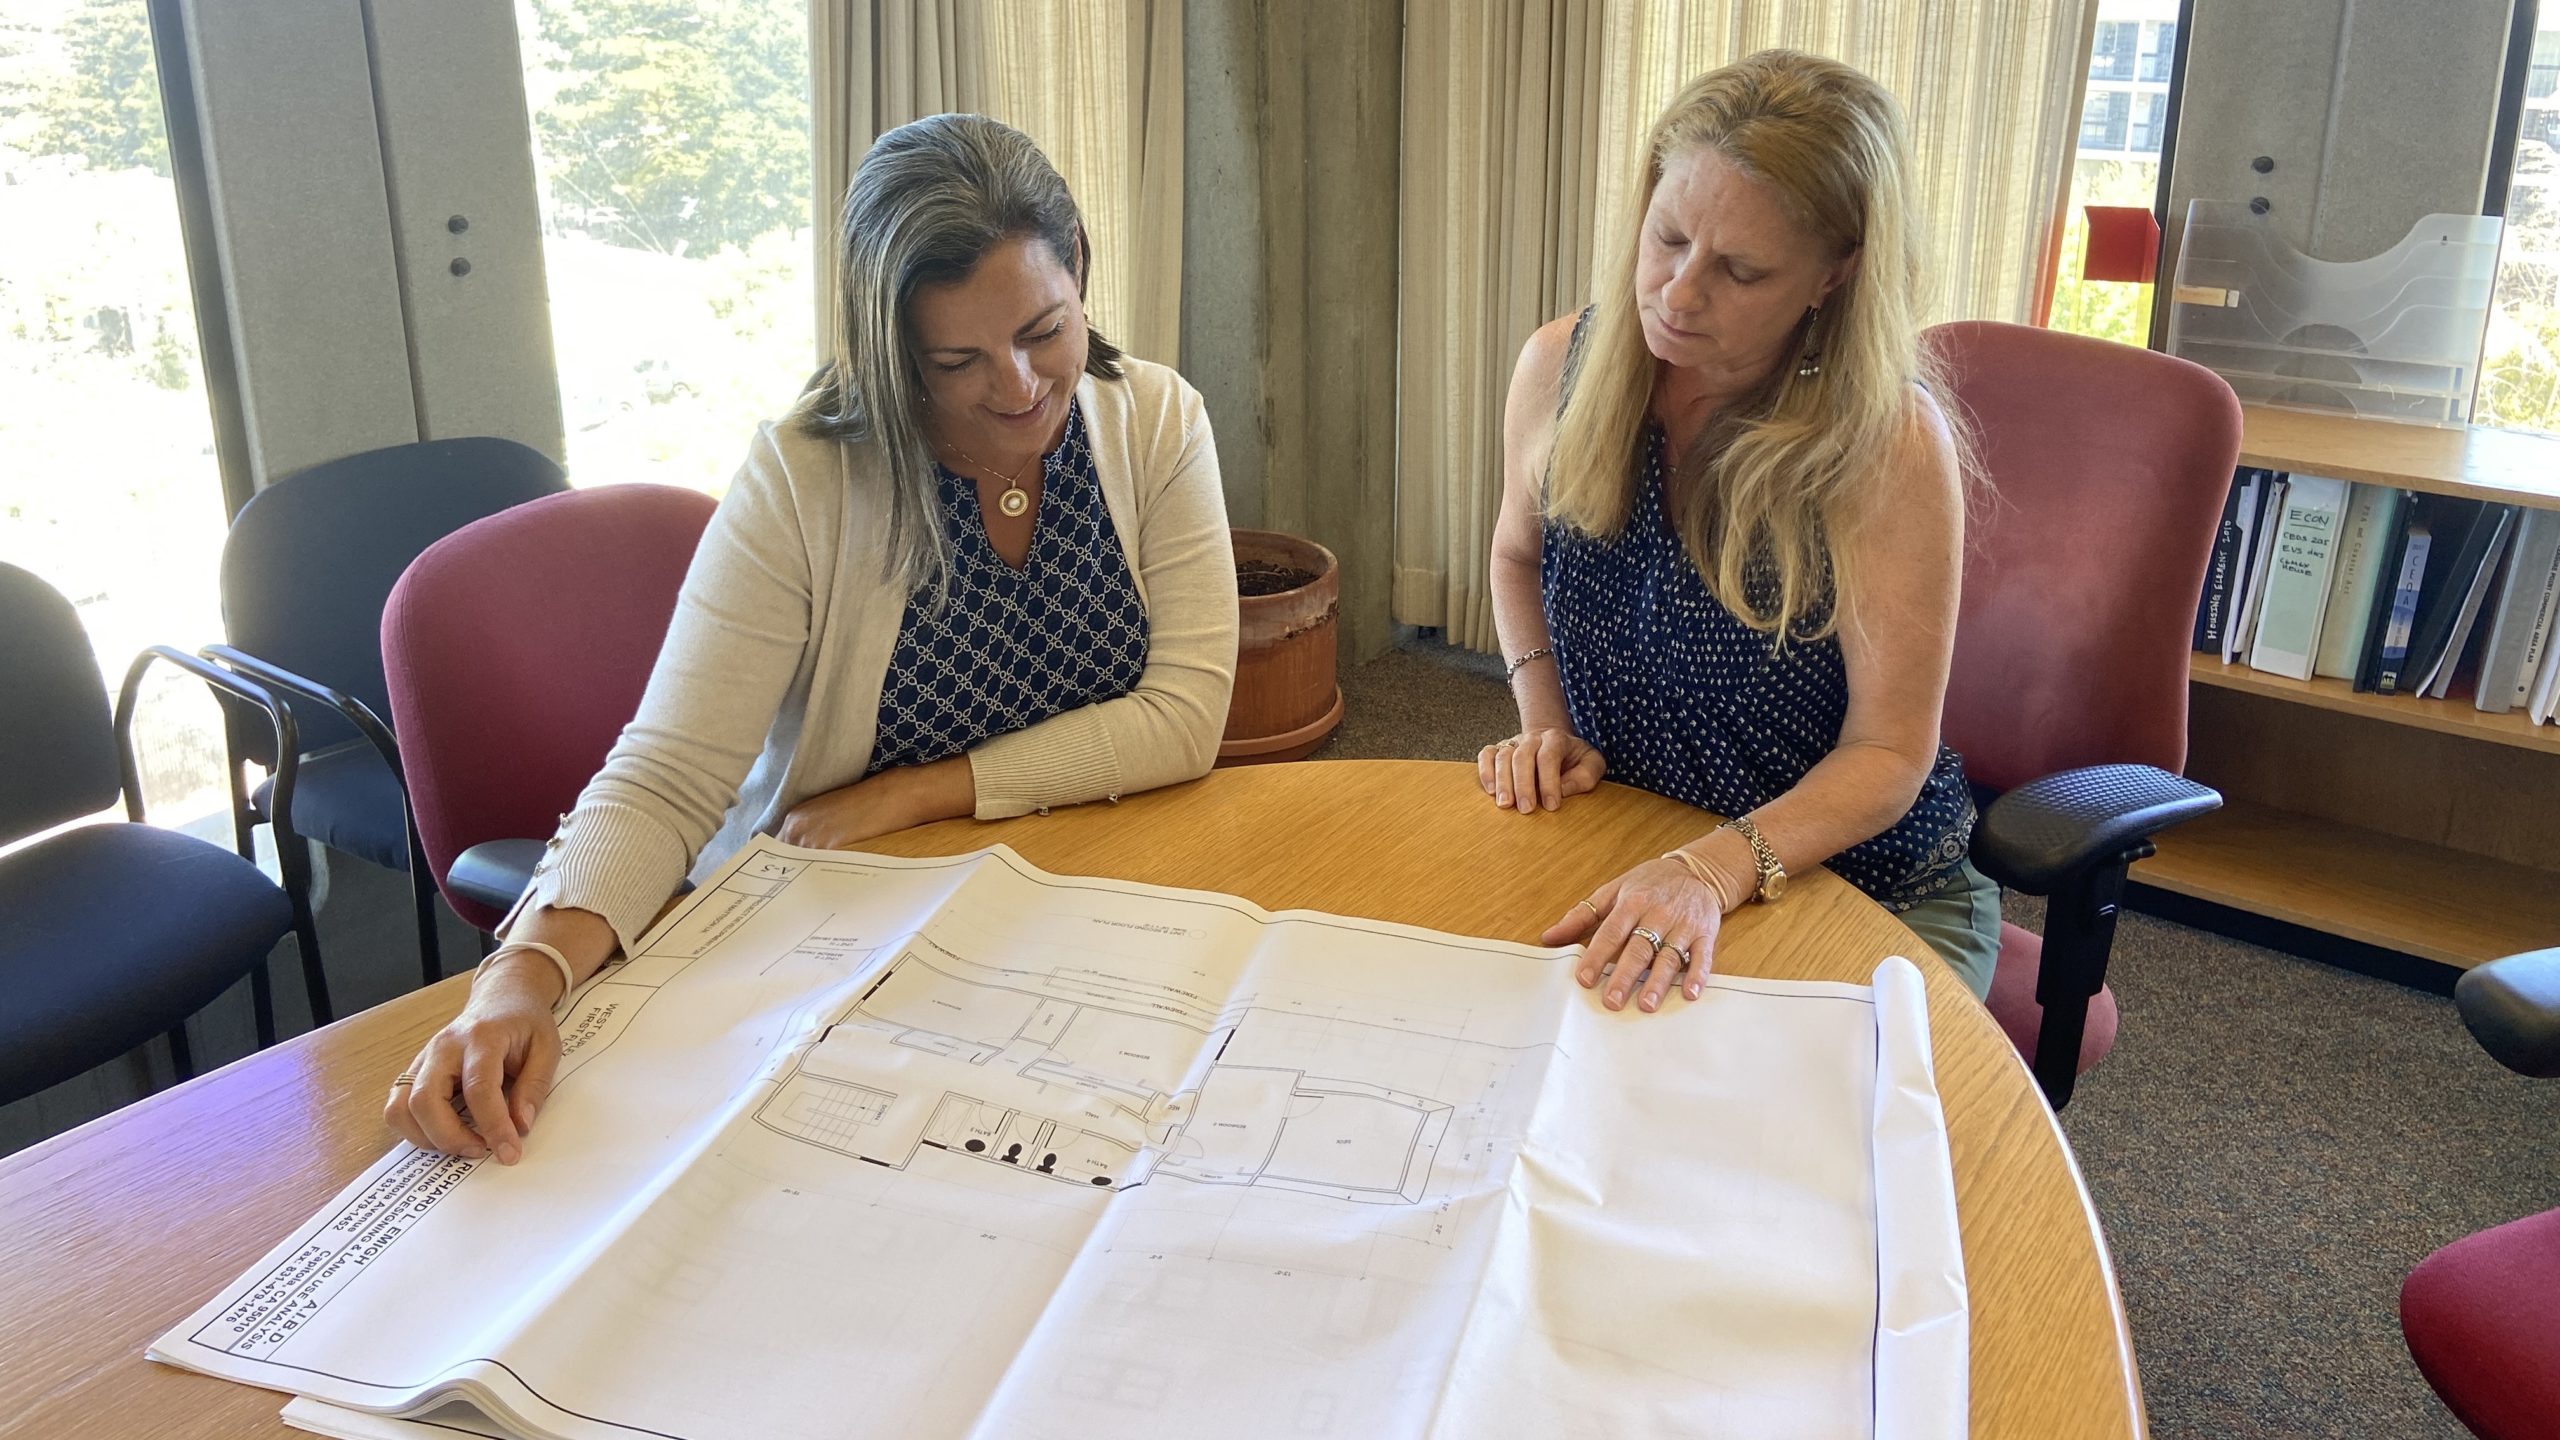 Carolyn Burke, left, is the assistant director of community development and infrastructure for the County of Santa Cruz. She looks at building plans with Santa Cruz County Principal Planner Stephanie Hansen. (Grace Stetson — Santa Cruz Local)